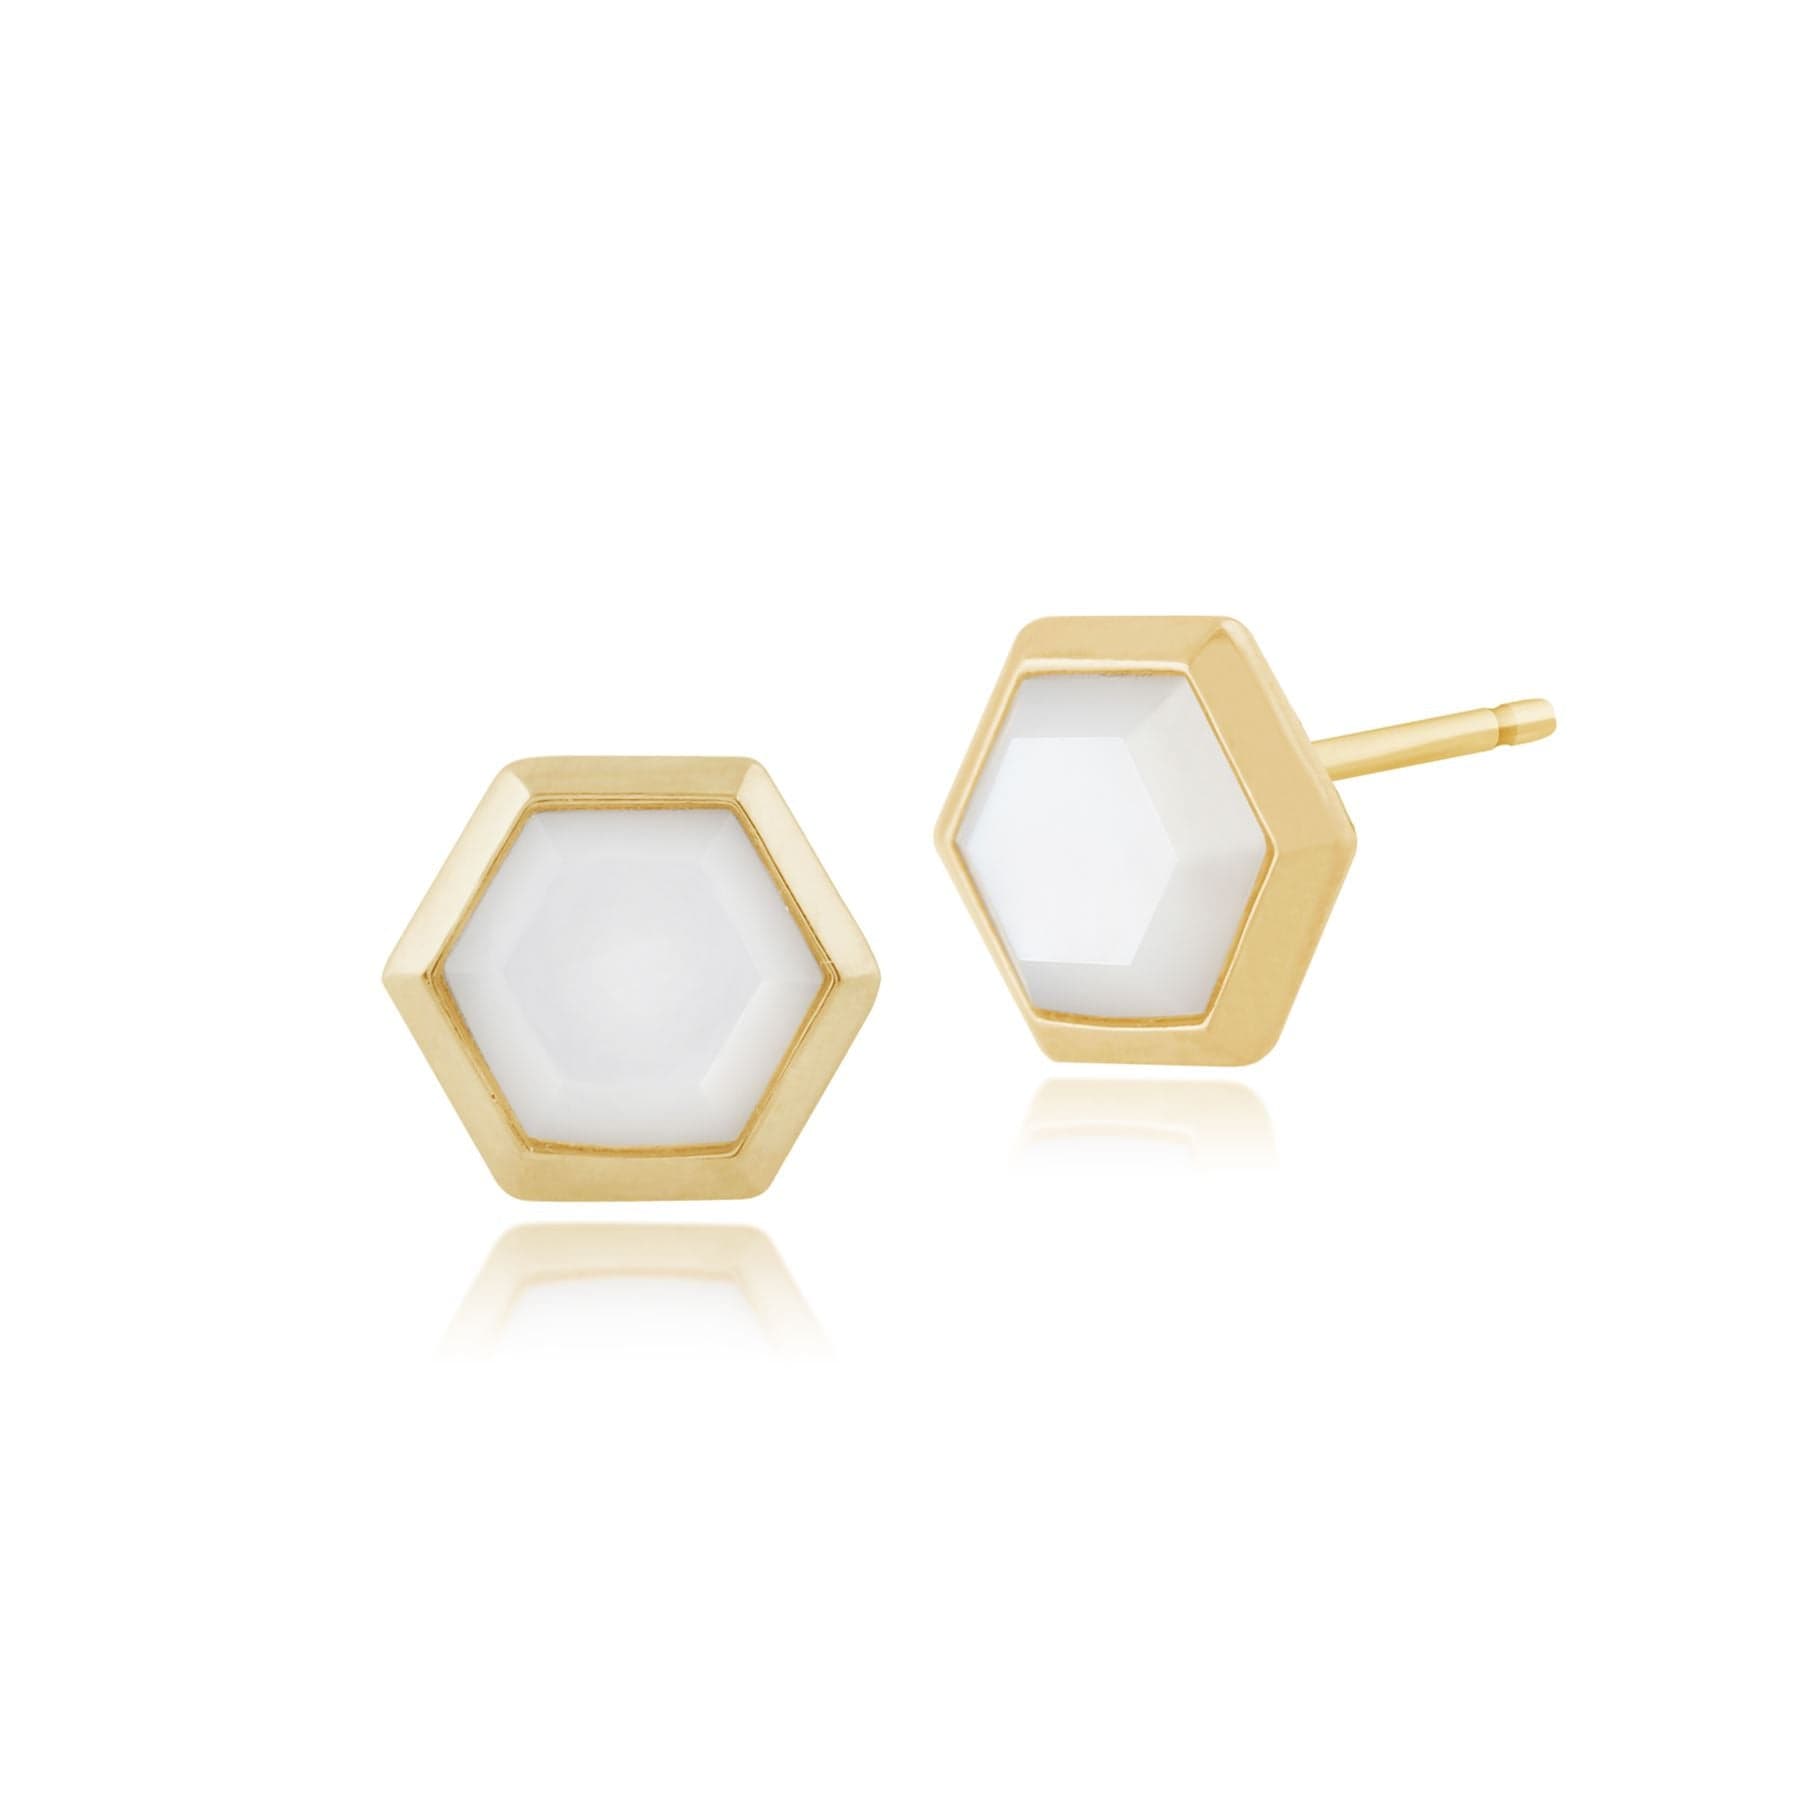 271E012803925 Geometric Mother of Pearl Prism Stud Earrings in Gold Plated 925 Sterling Silver 1